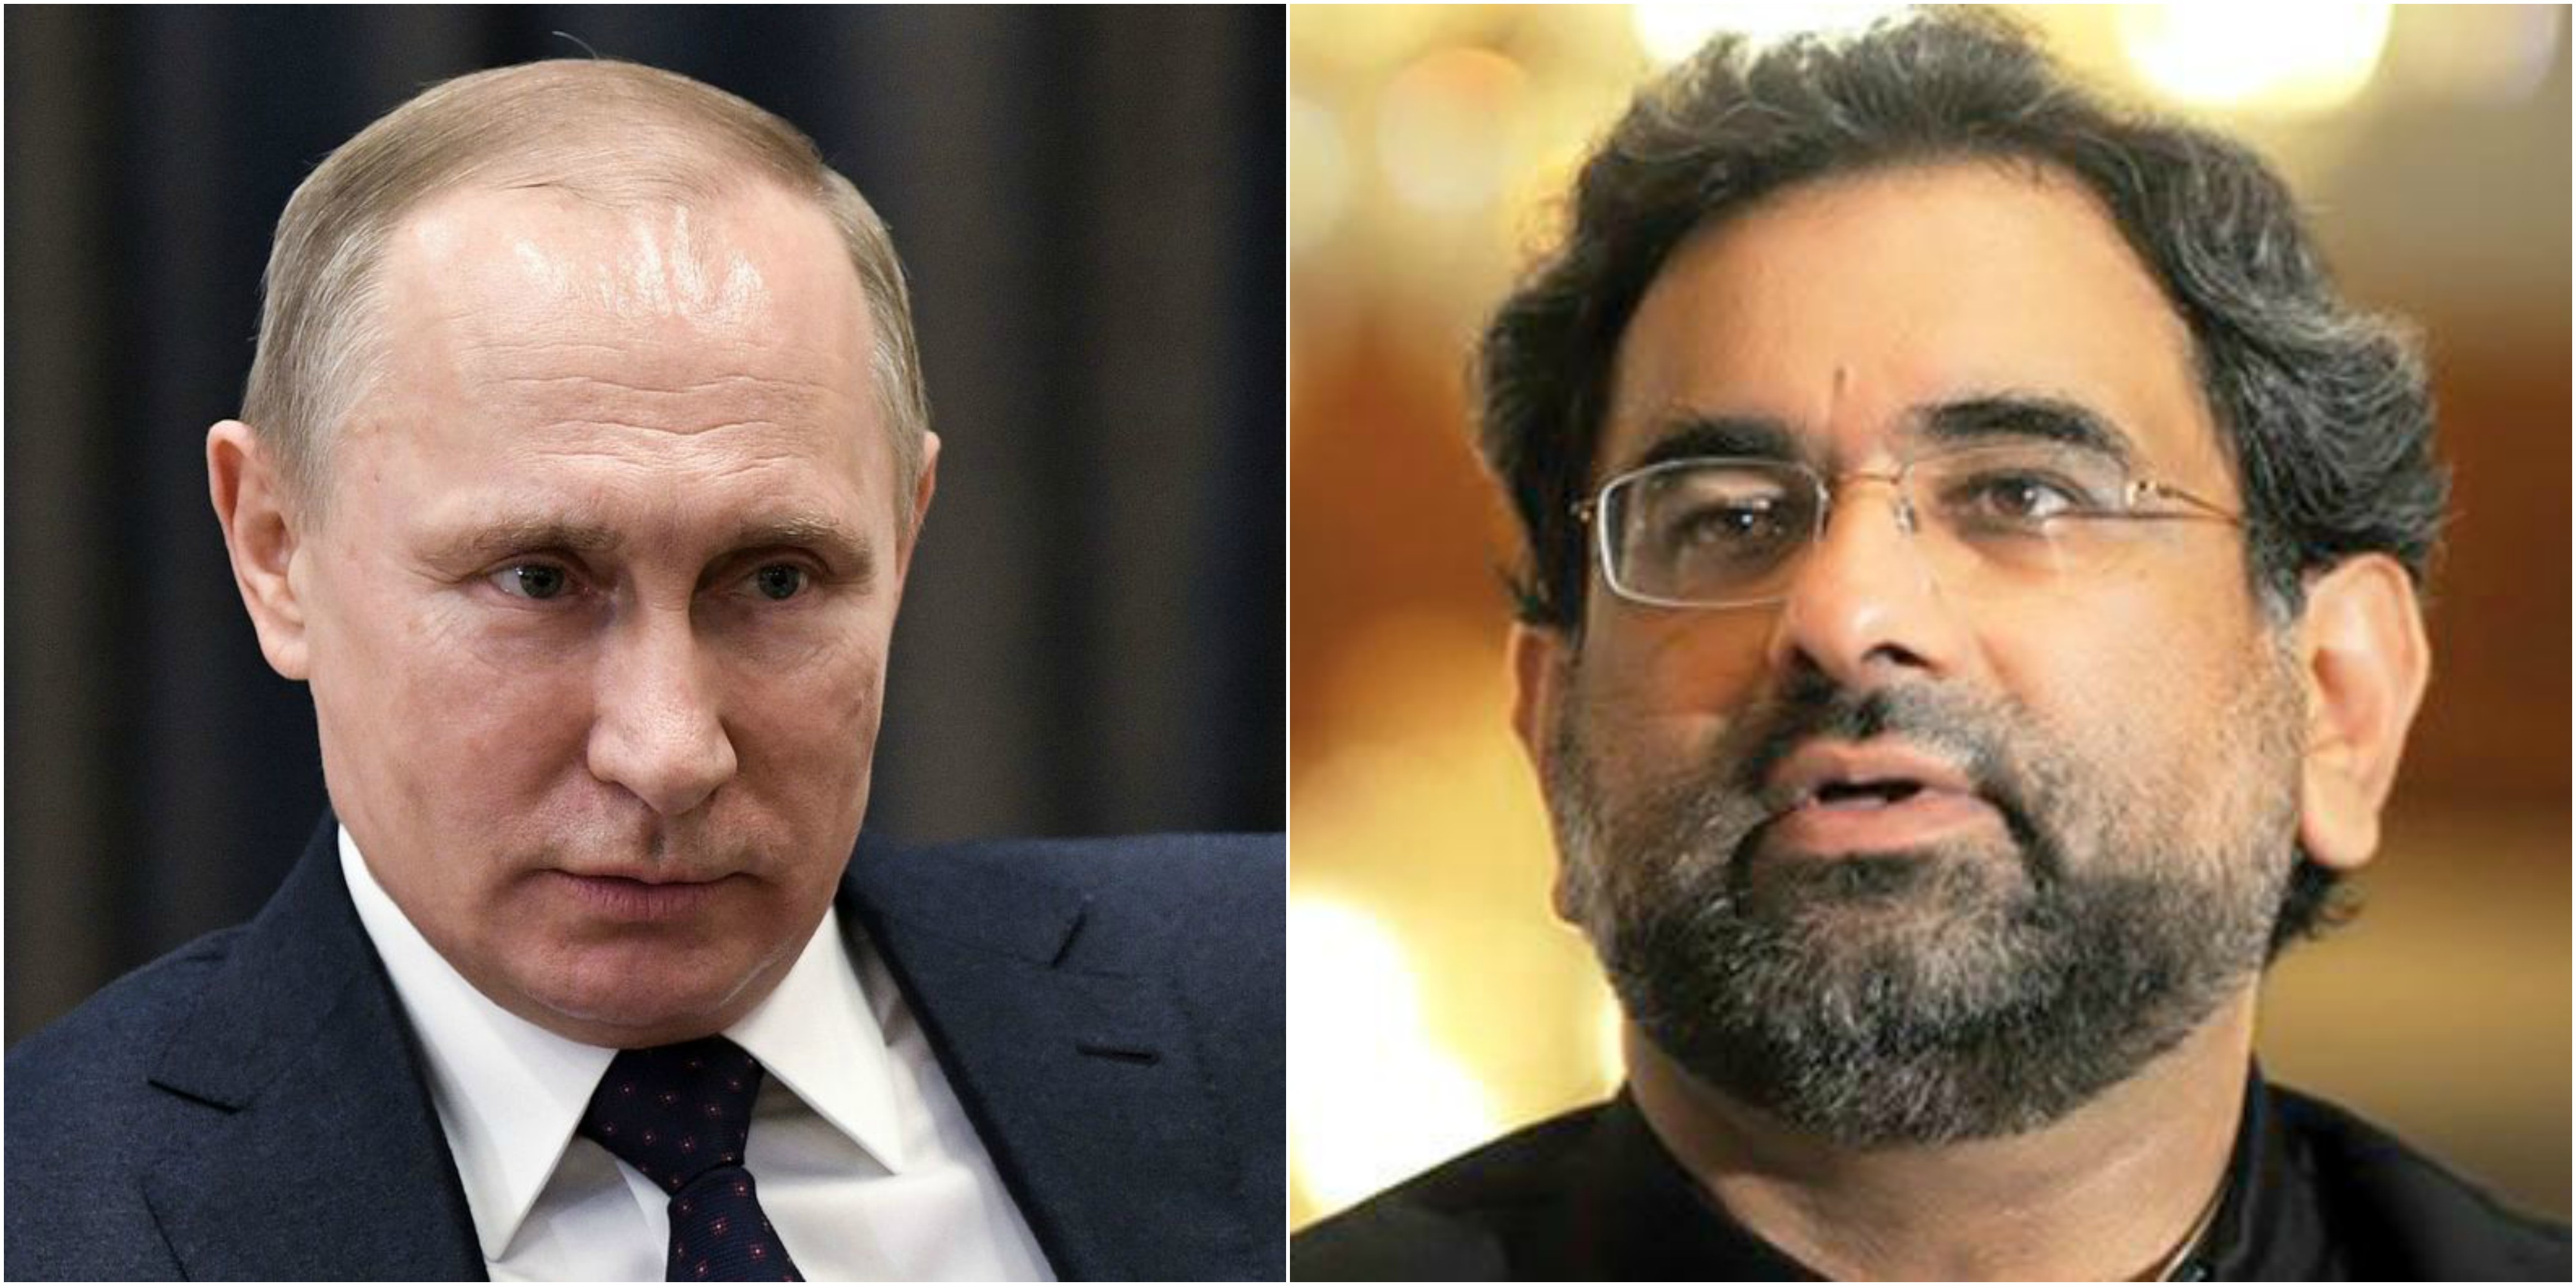 pak-wants-to-friends-with-russia-wants-to-deal-dangerous-weapons